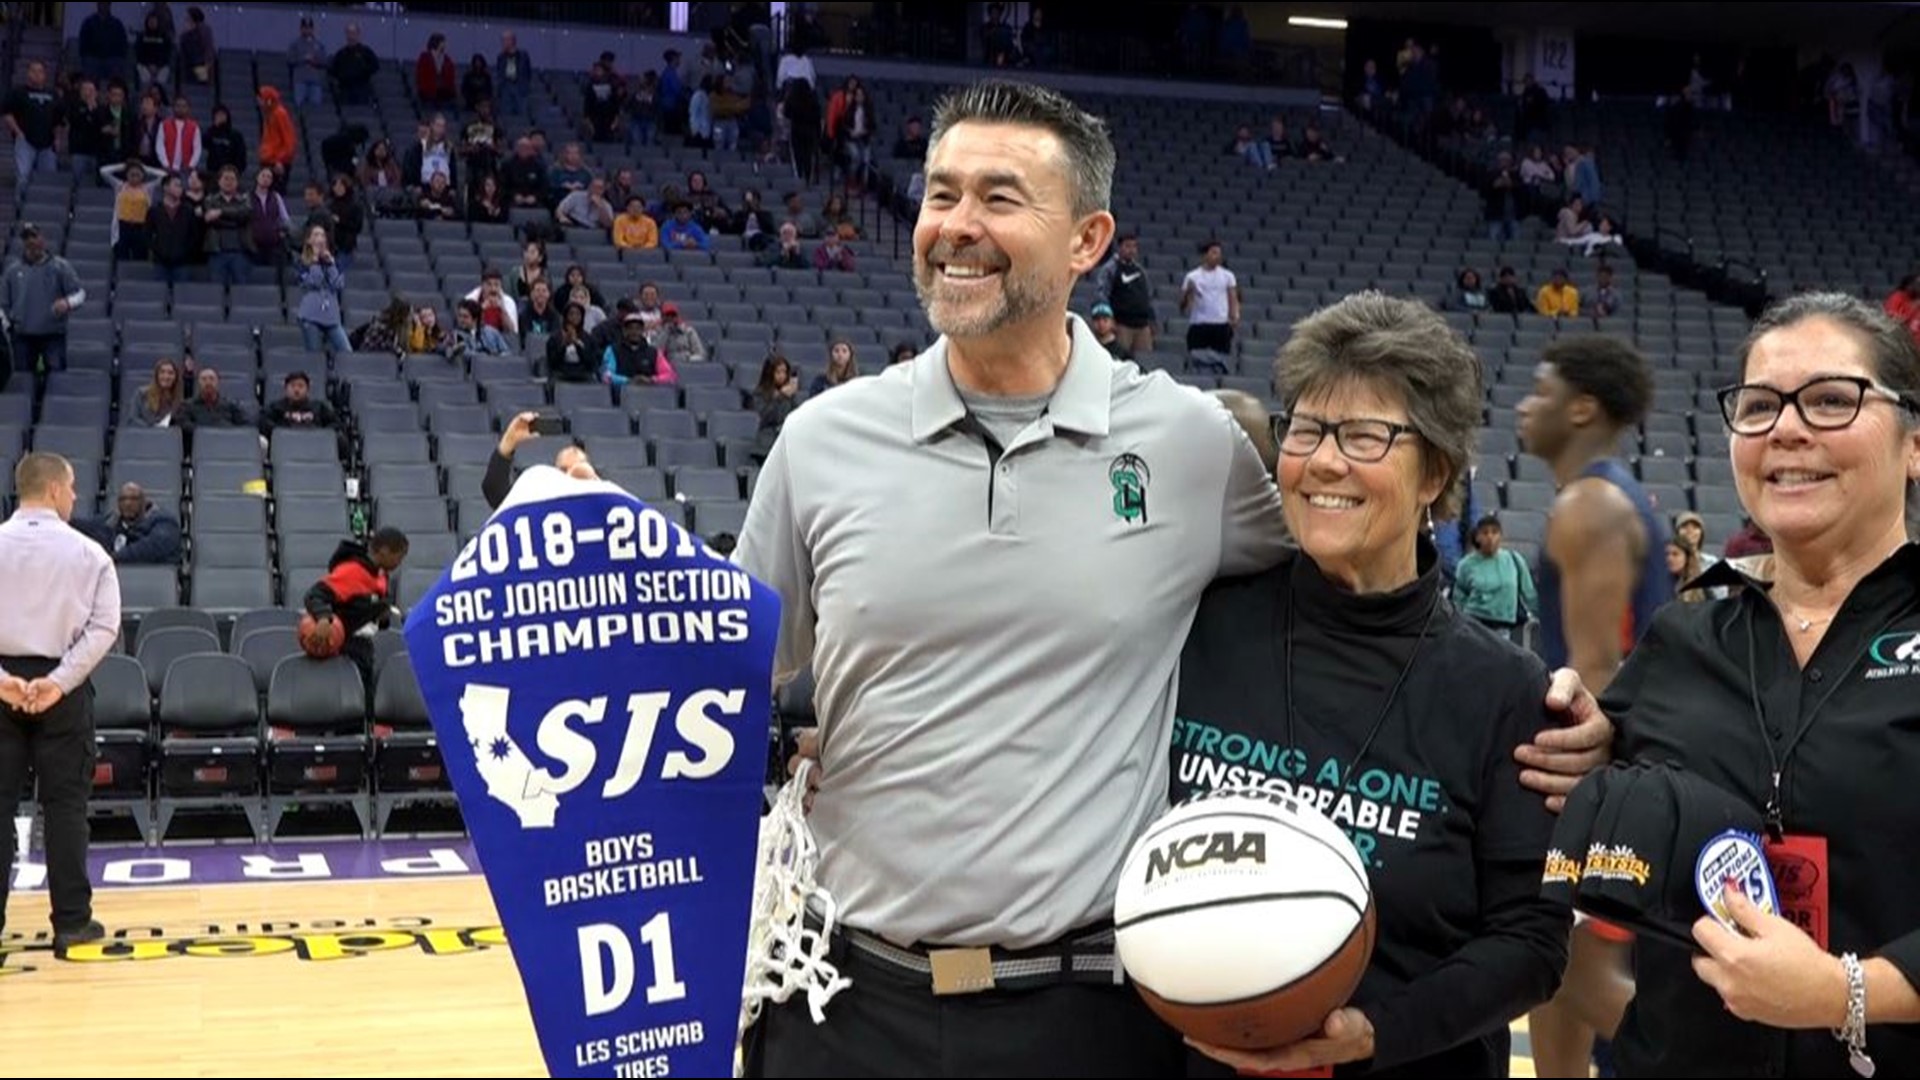 The top-seeded Sheldon Huskies erased a 13-point third quarter deficit to rally and defeat No. 3 Modesto Christian Crusaders 64-61, to win the Sac-Joaquin Section Boys Div. I Championship on Saturday night at Golden 1 Center. The Huskies were led by their seniors Justin Nguyen and Kaito Williams, who each scored 13 points in the victory.